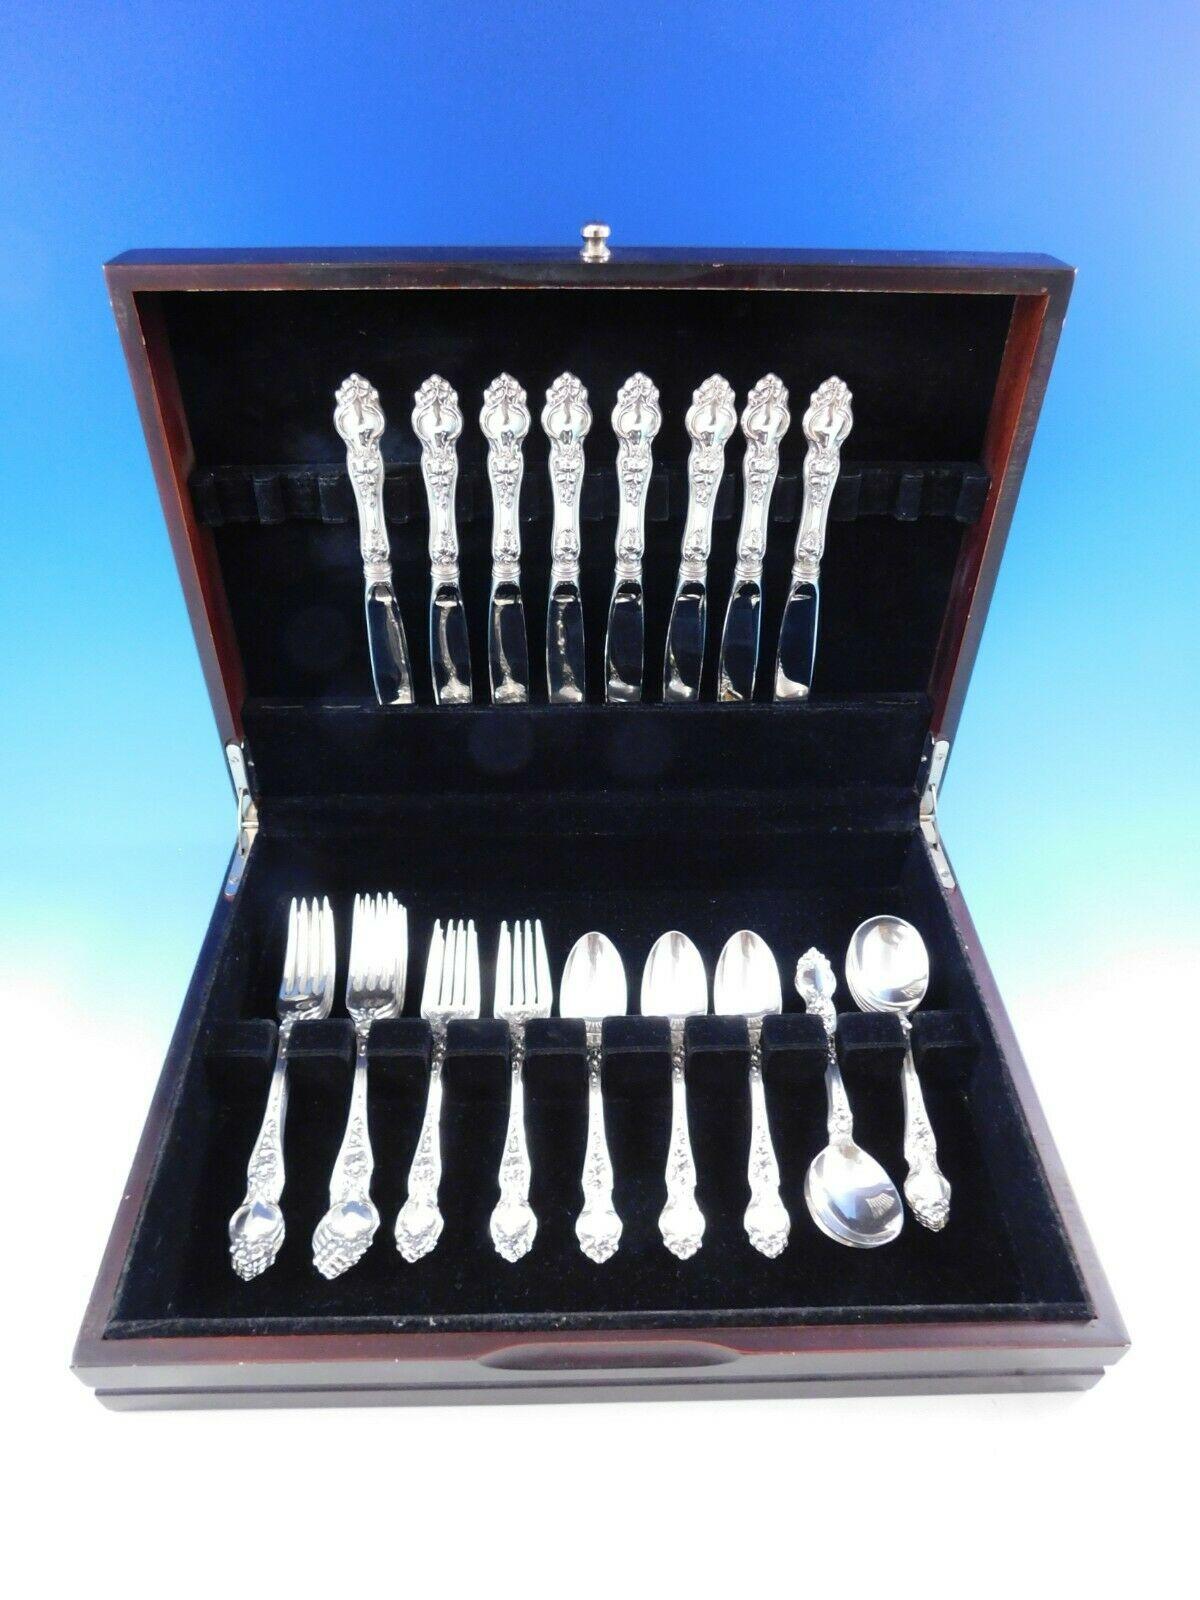 Violet by Wallace sterling silver flatware set - 40 pieces. This set includes:

8 knives, 9